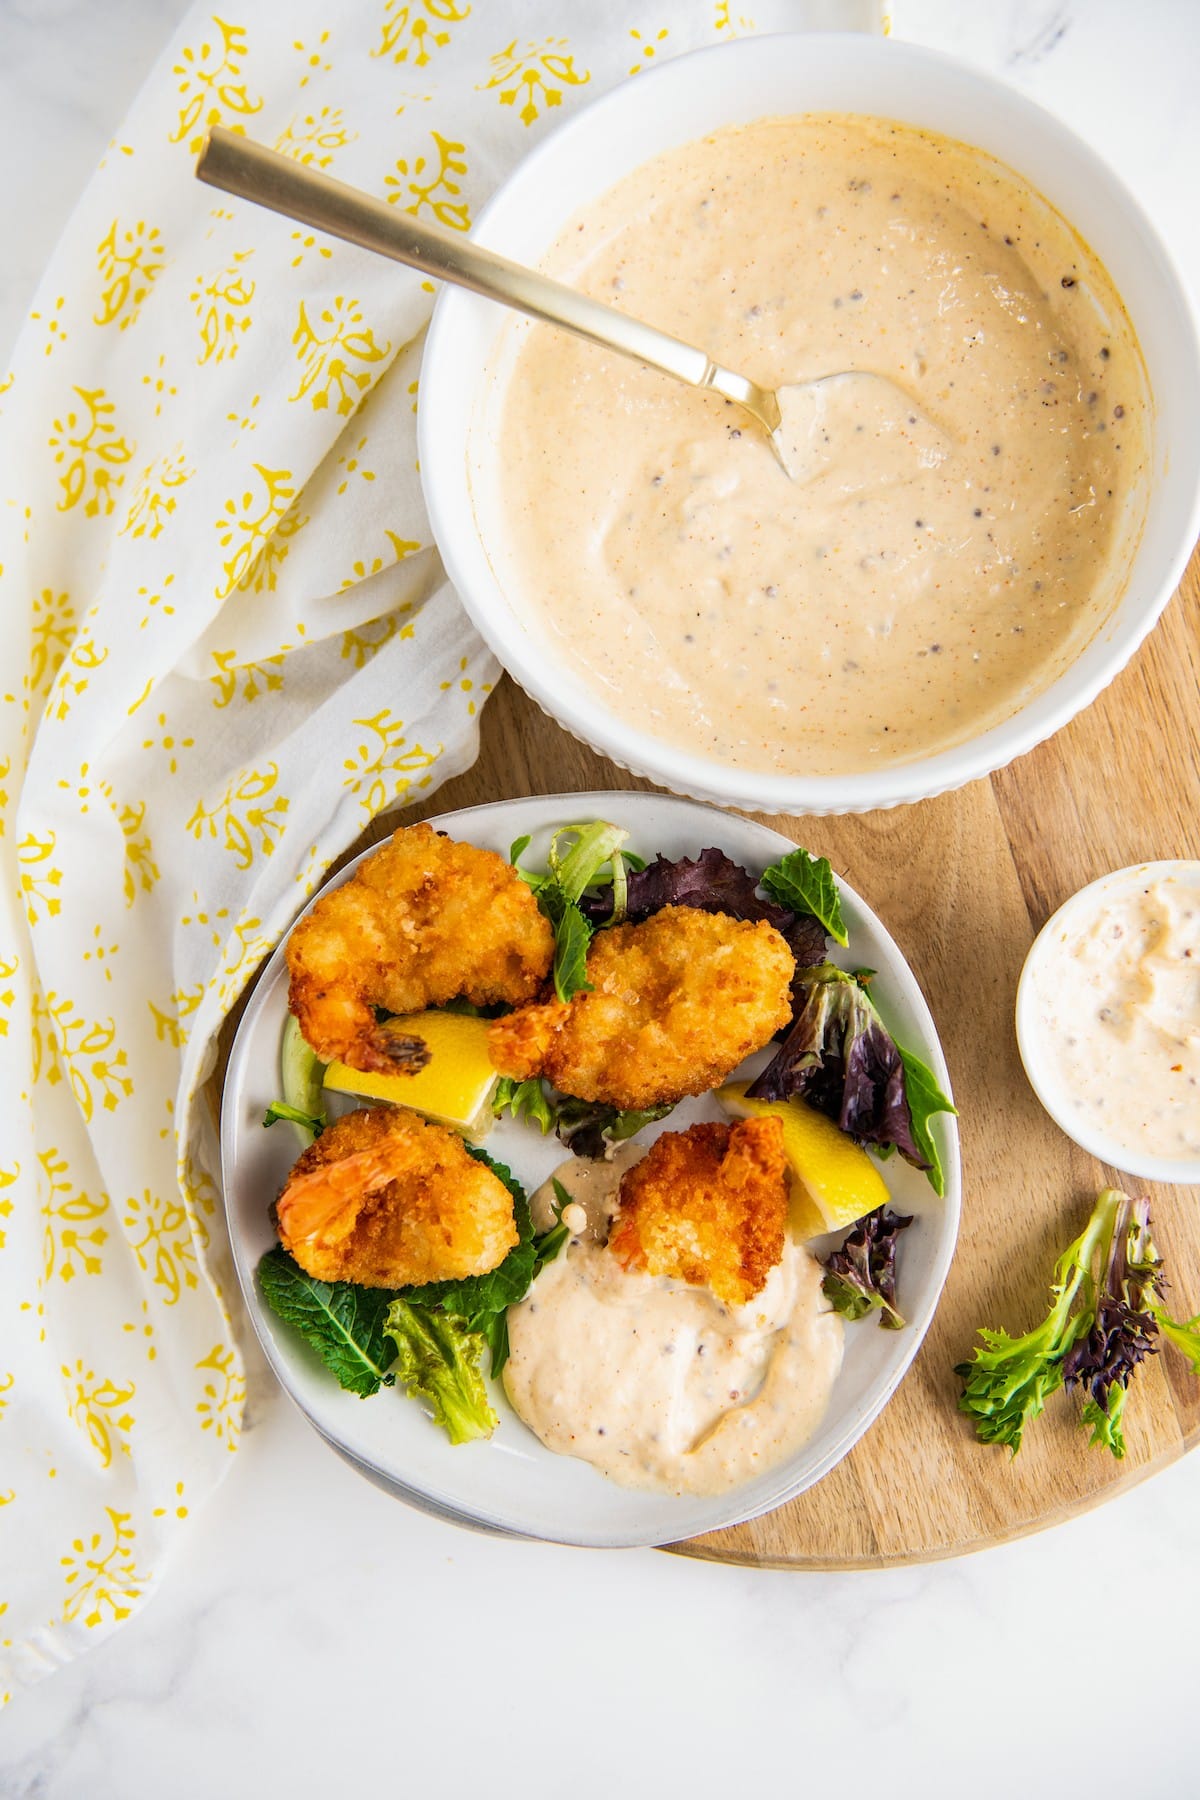 Overhead view of a bowl of remoulade sauce with a spoon in it, and a plate of fried shrimp, greens, lemons, and remoulade